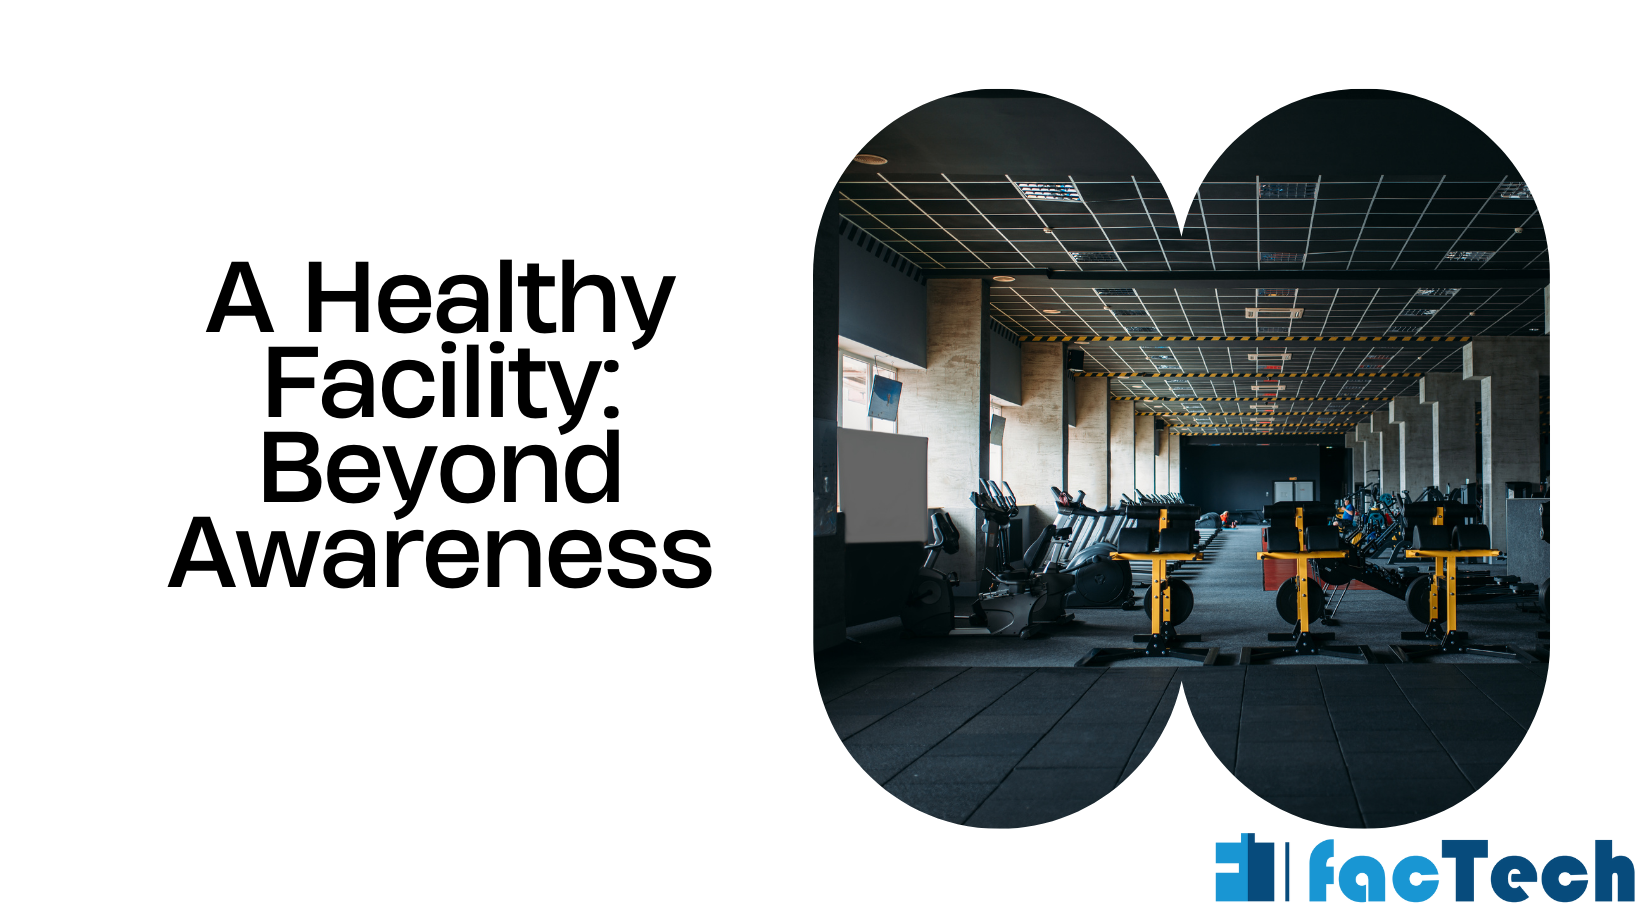 Building a Healthy Facility More Than Just Awareness